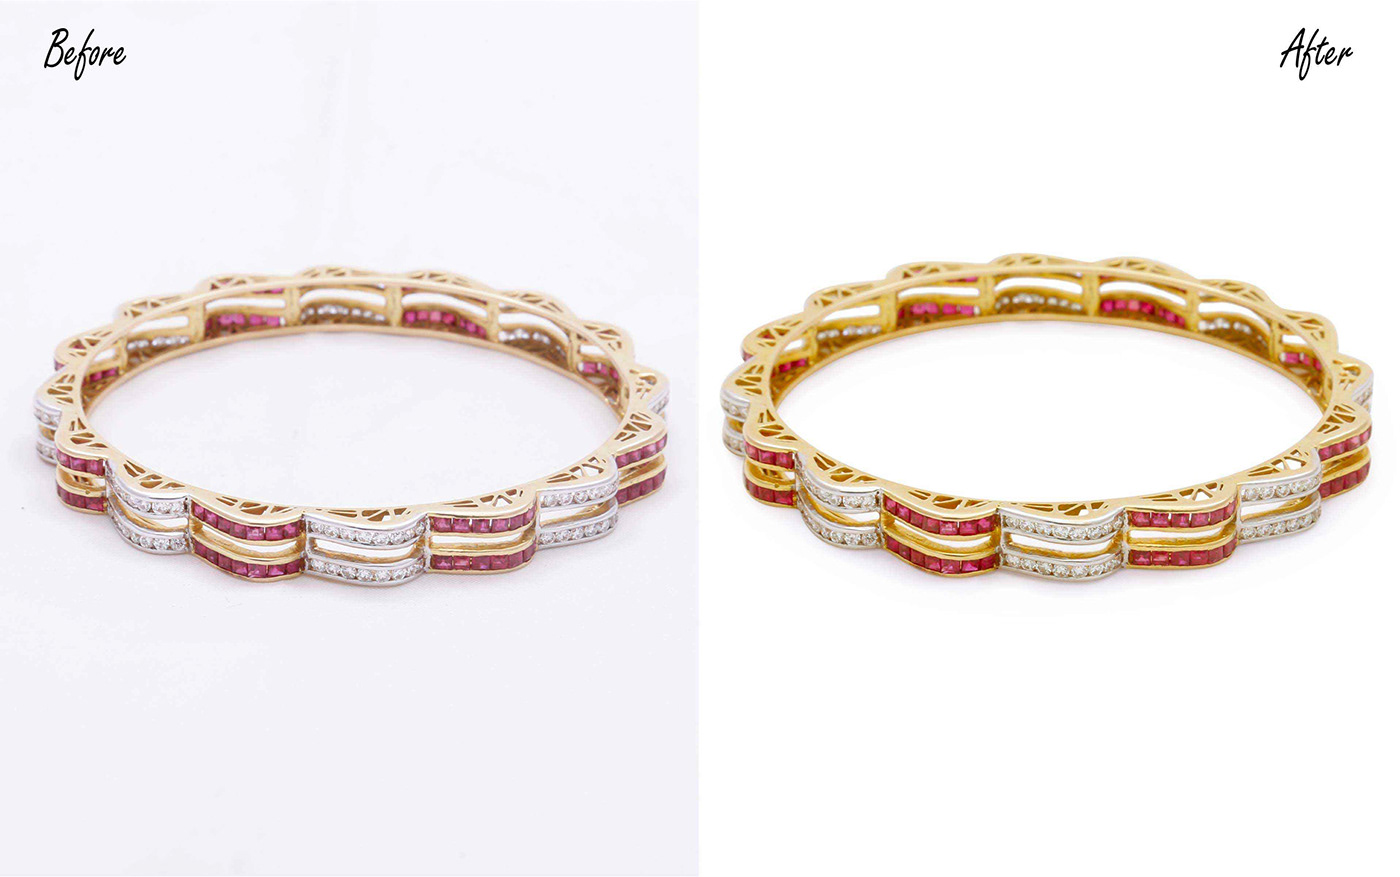 Clipping path color correction Image Editing photoshop